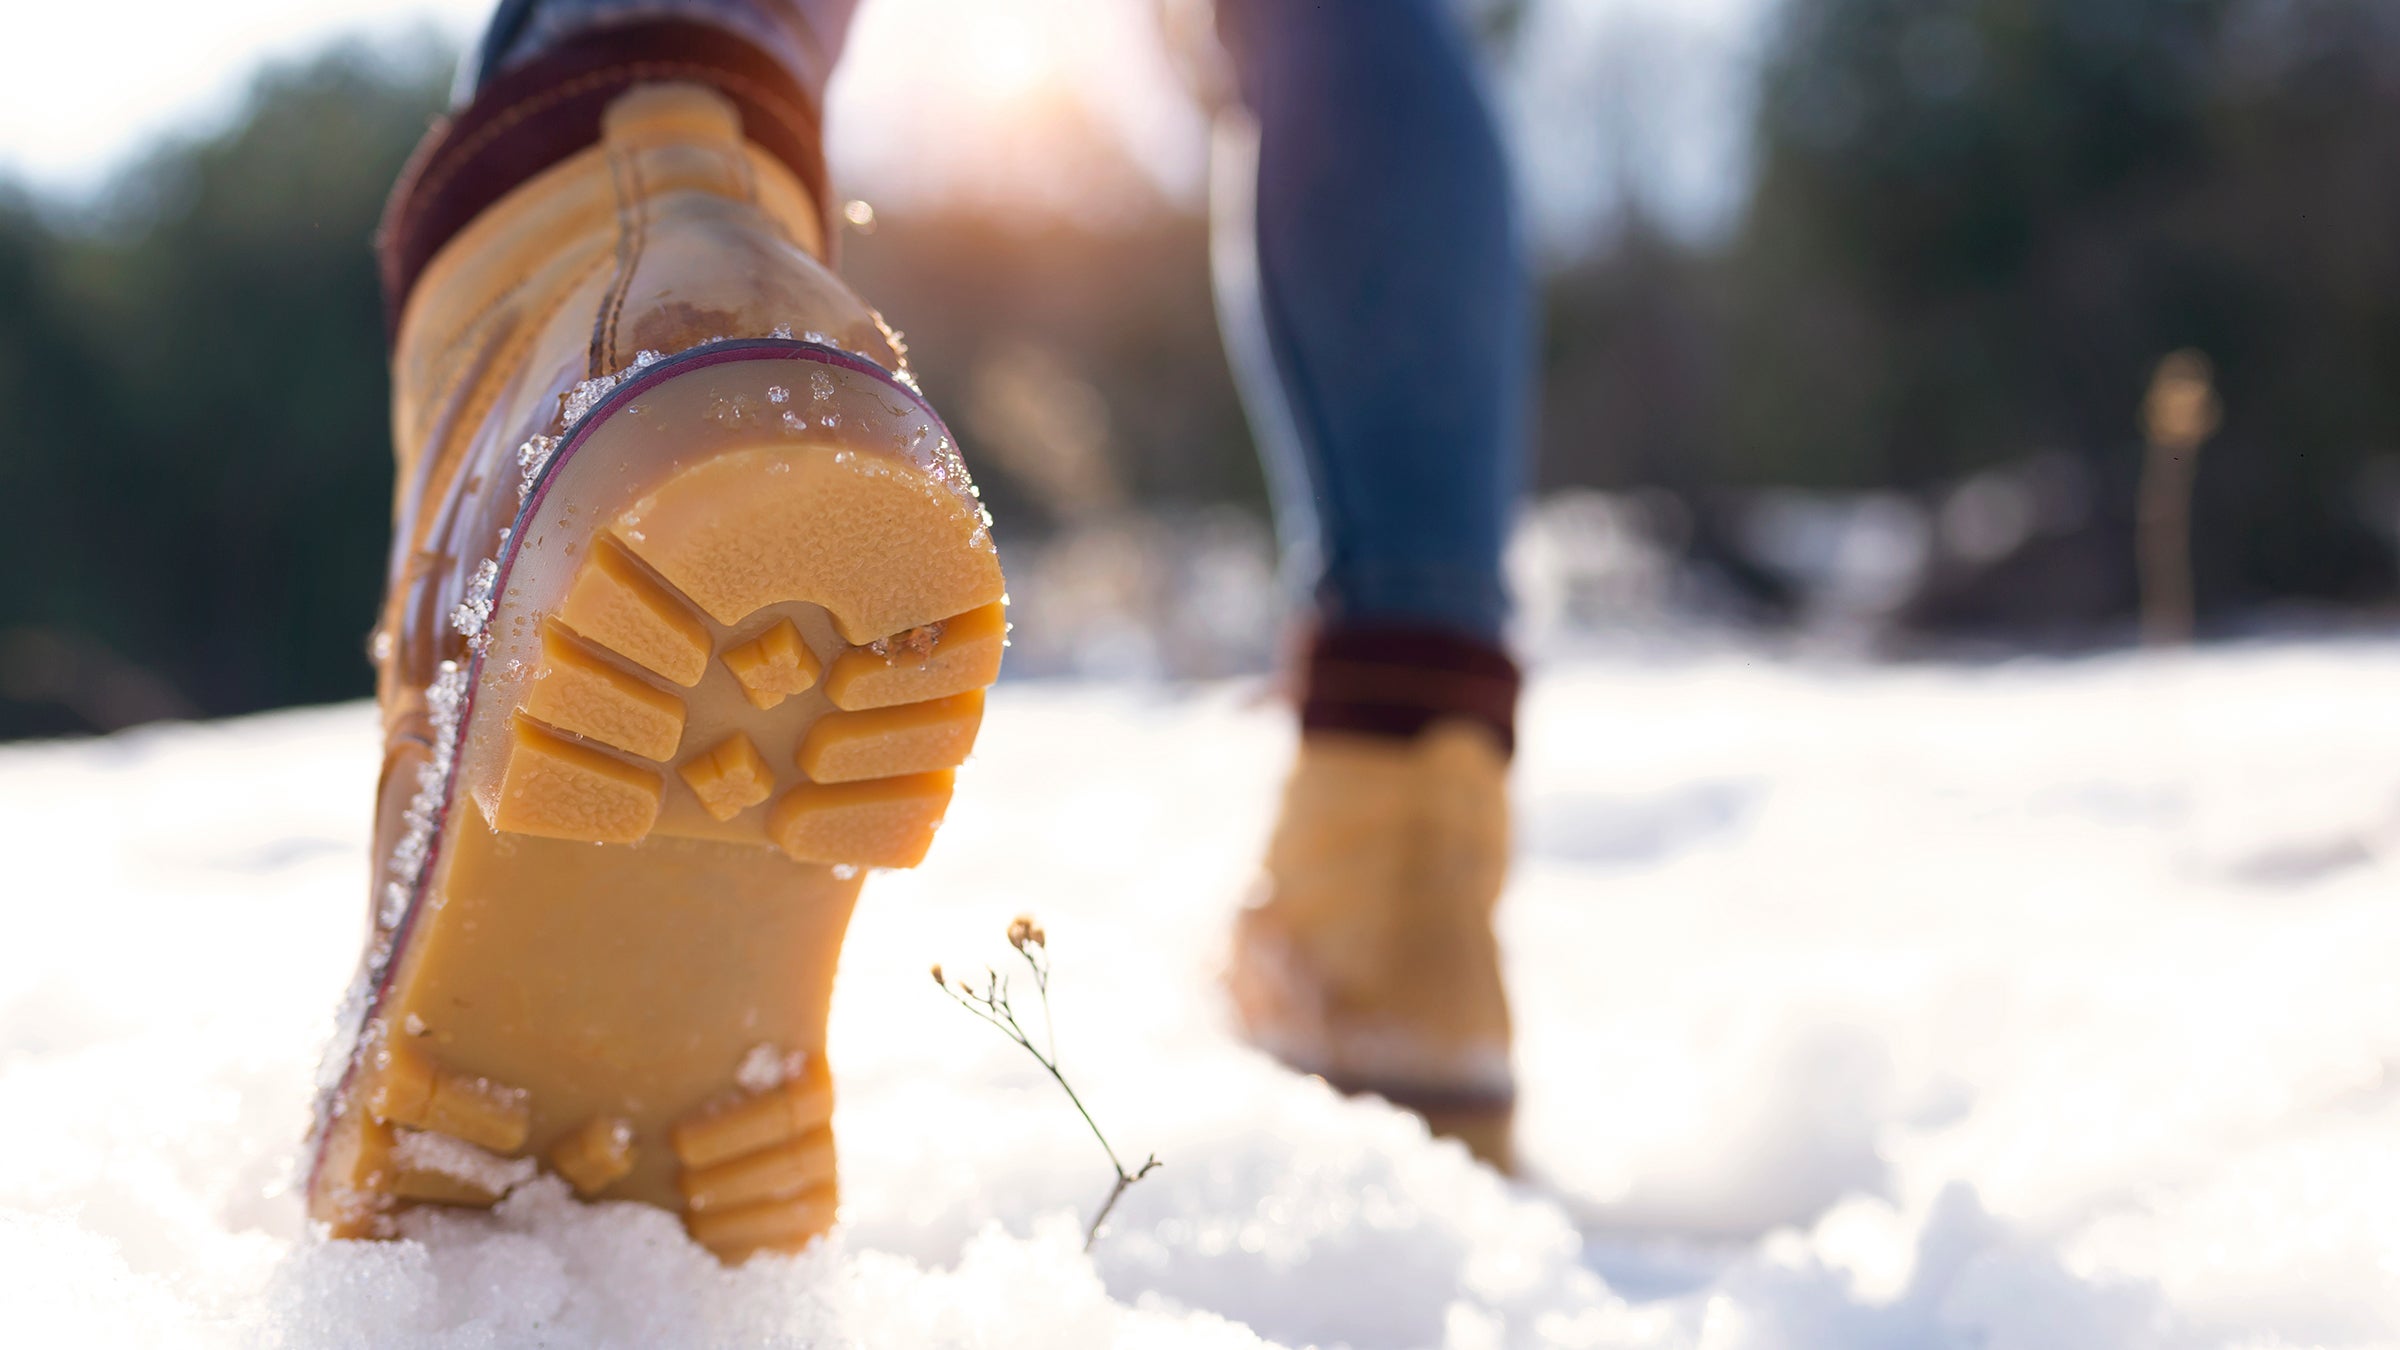 Can you wear open toe shoes in winter? - Quora